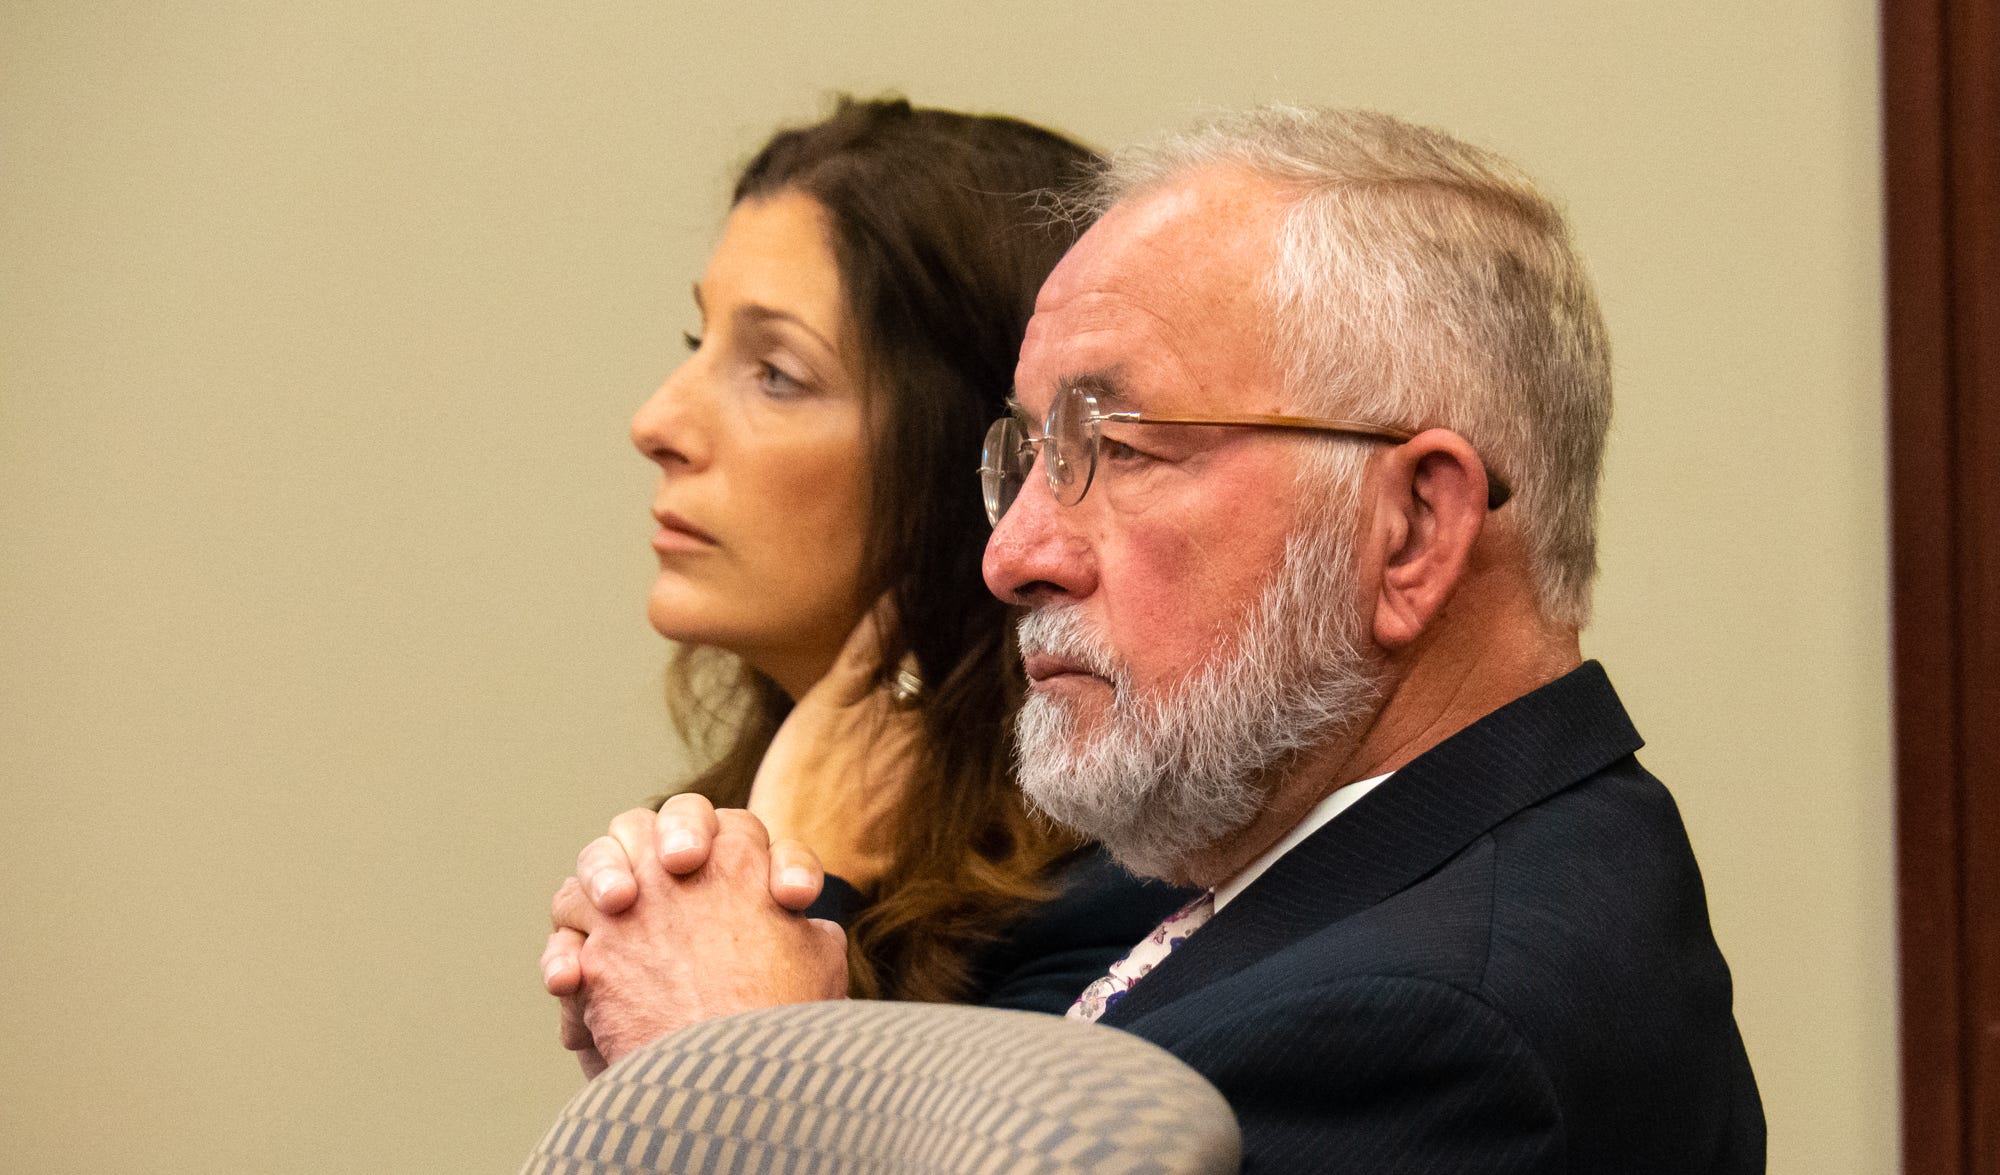 William Strampel, the former dean of Michigan State University's College of Osteopathic Medicine, sits at the defense table during closing arguments in his trial on misconduct and sexual assault charges on Tuesday, June 11, 2019, in Ingham County Court in Lansing.